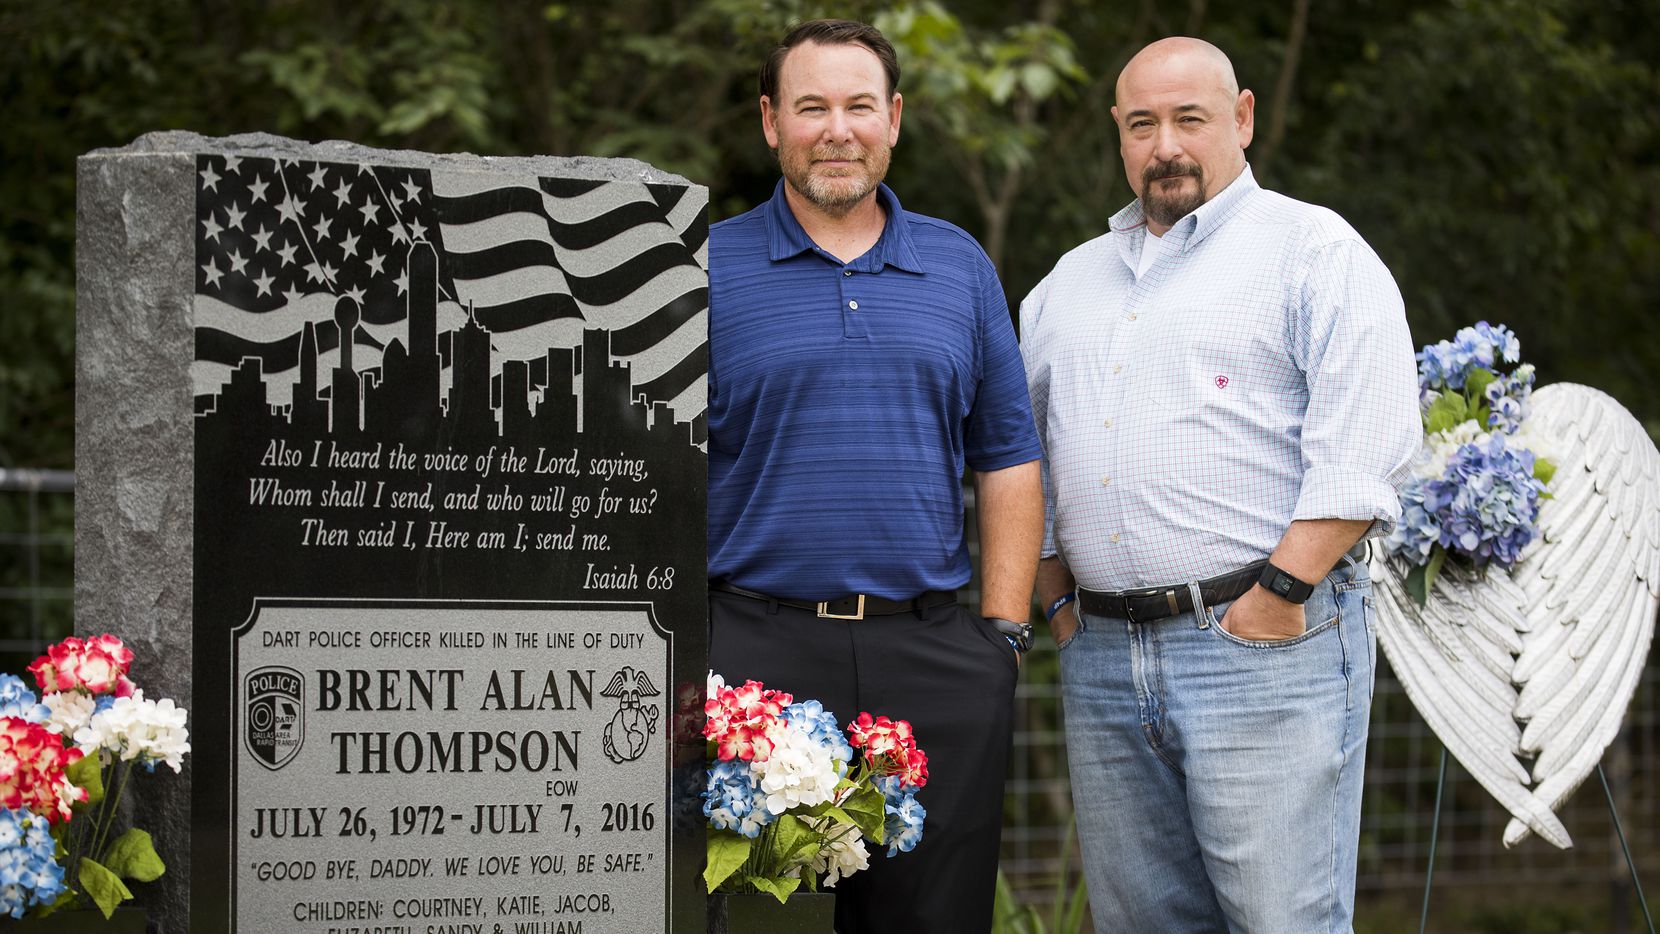 Lowell (right) and Daryl Thompson, the brothers of fallen DART police officer Brent...